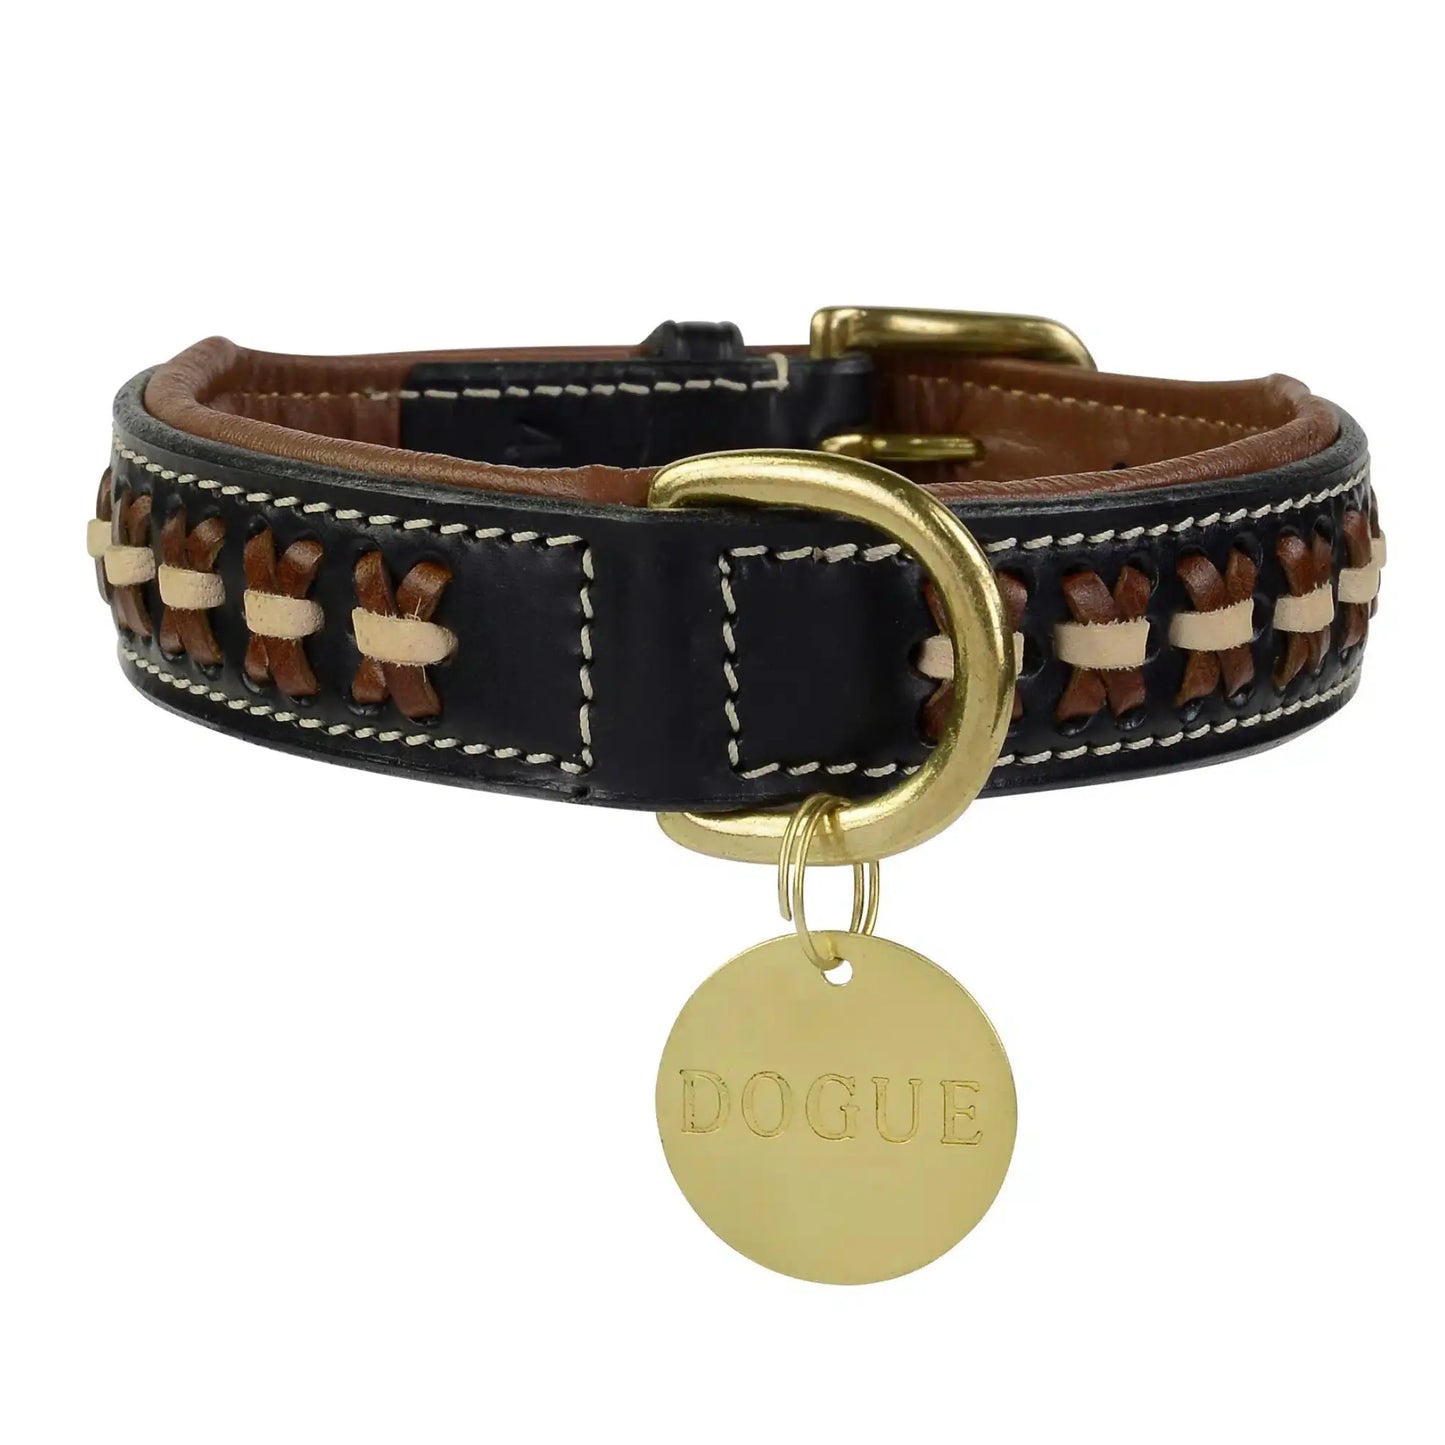 DOGUE Leather Man Dog Collar | Buy Online at DOGUE Australia